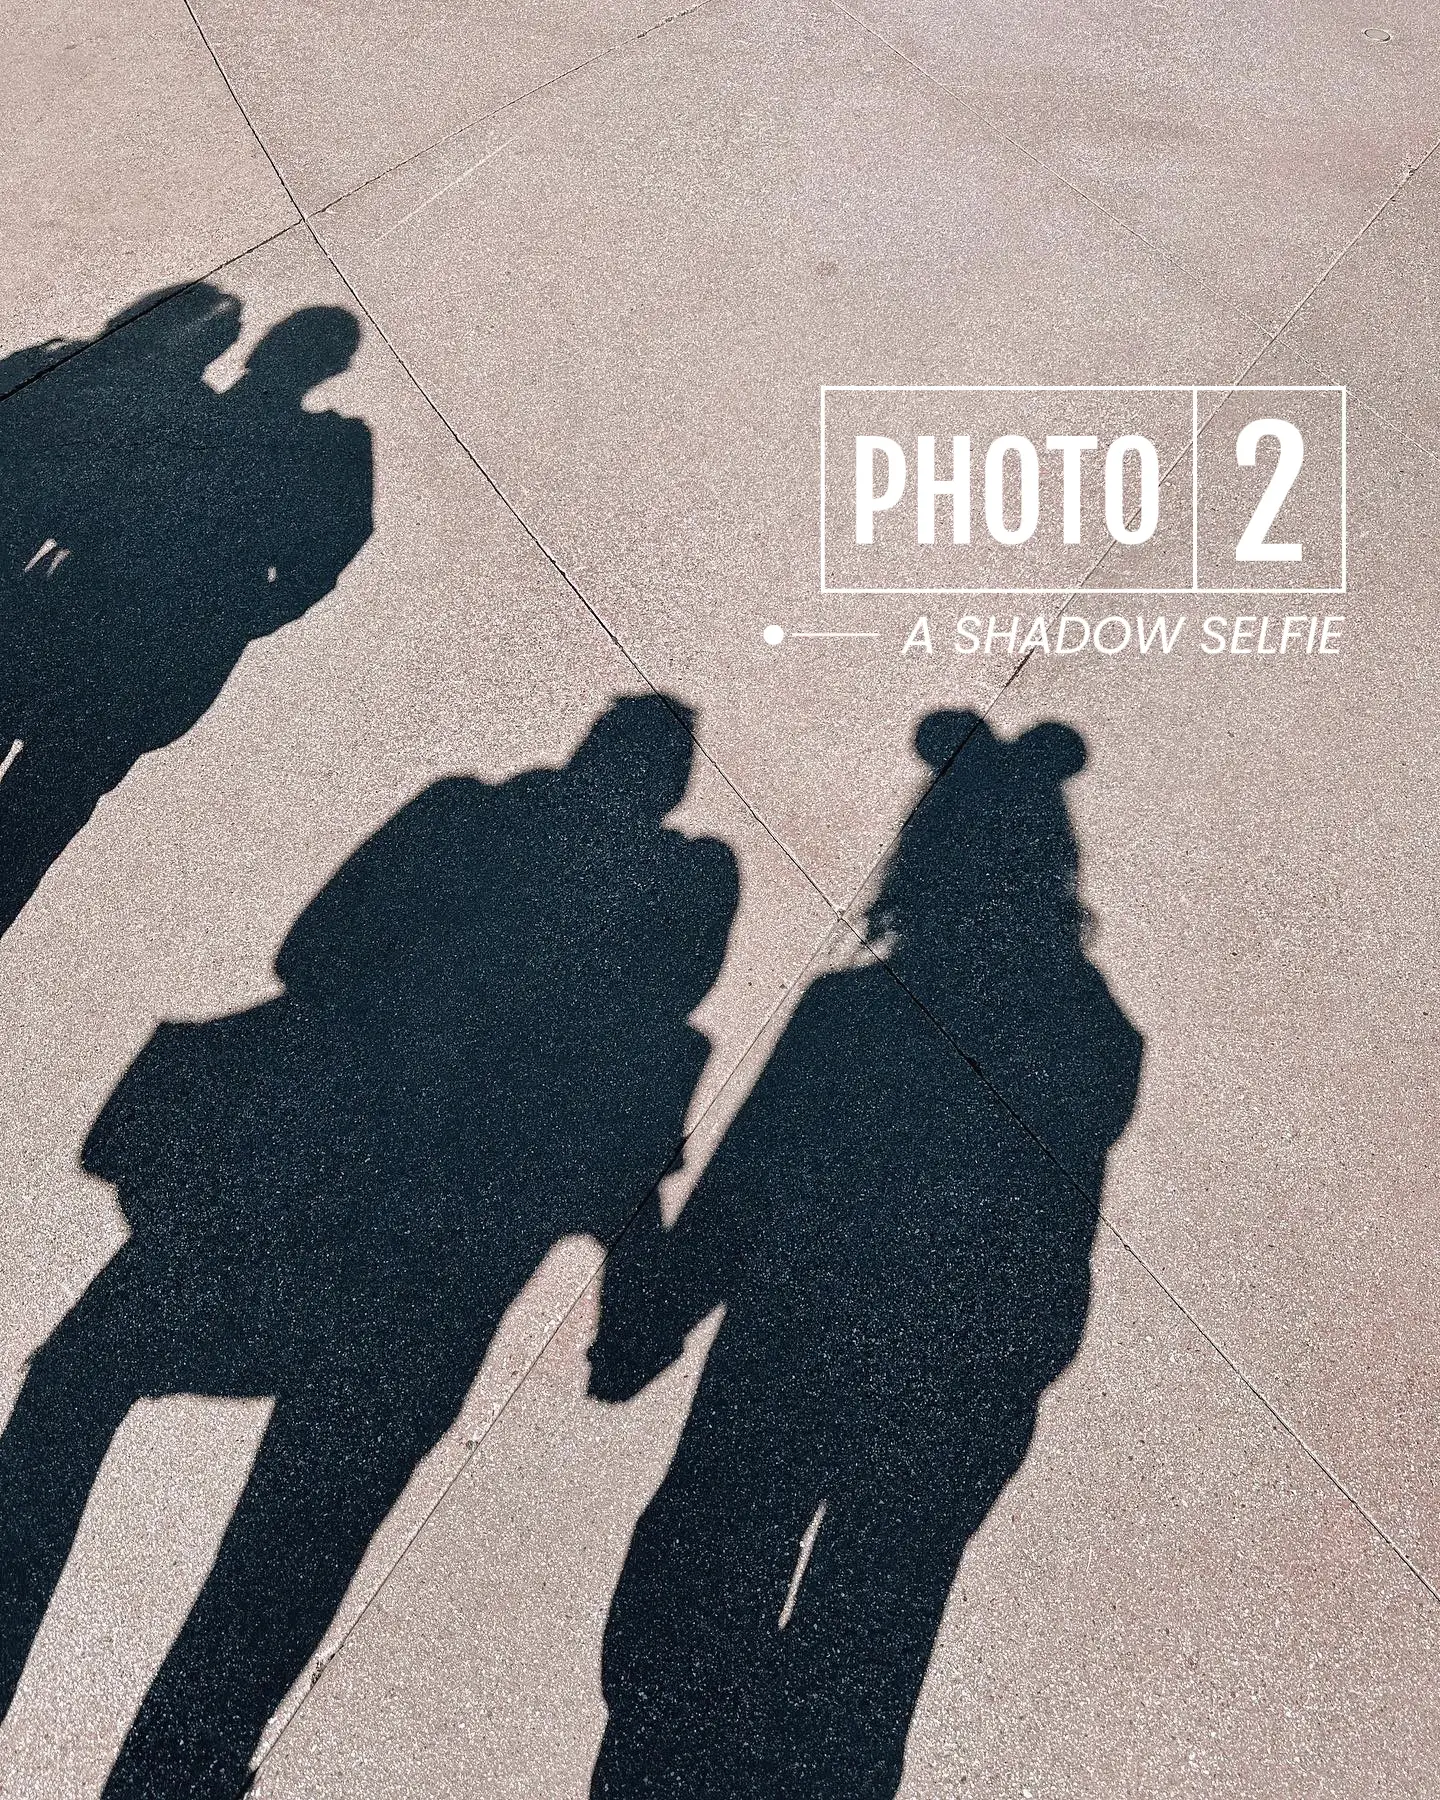  Three people are walking on a sidewalk, and their shadows are cast on the wall. The shadows are labeled with the words "PHOTO 2" and "A SHADOW SELFIE".